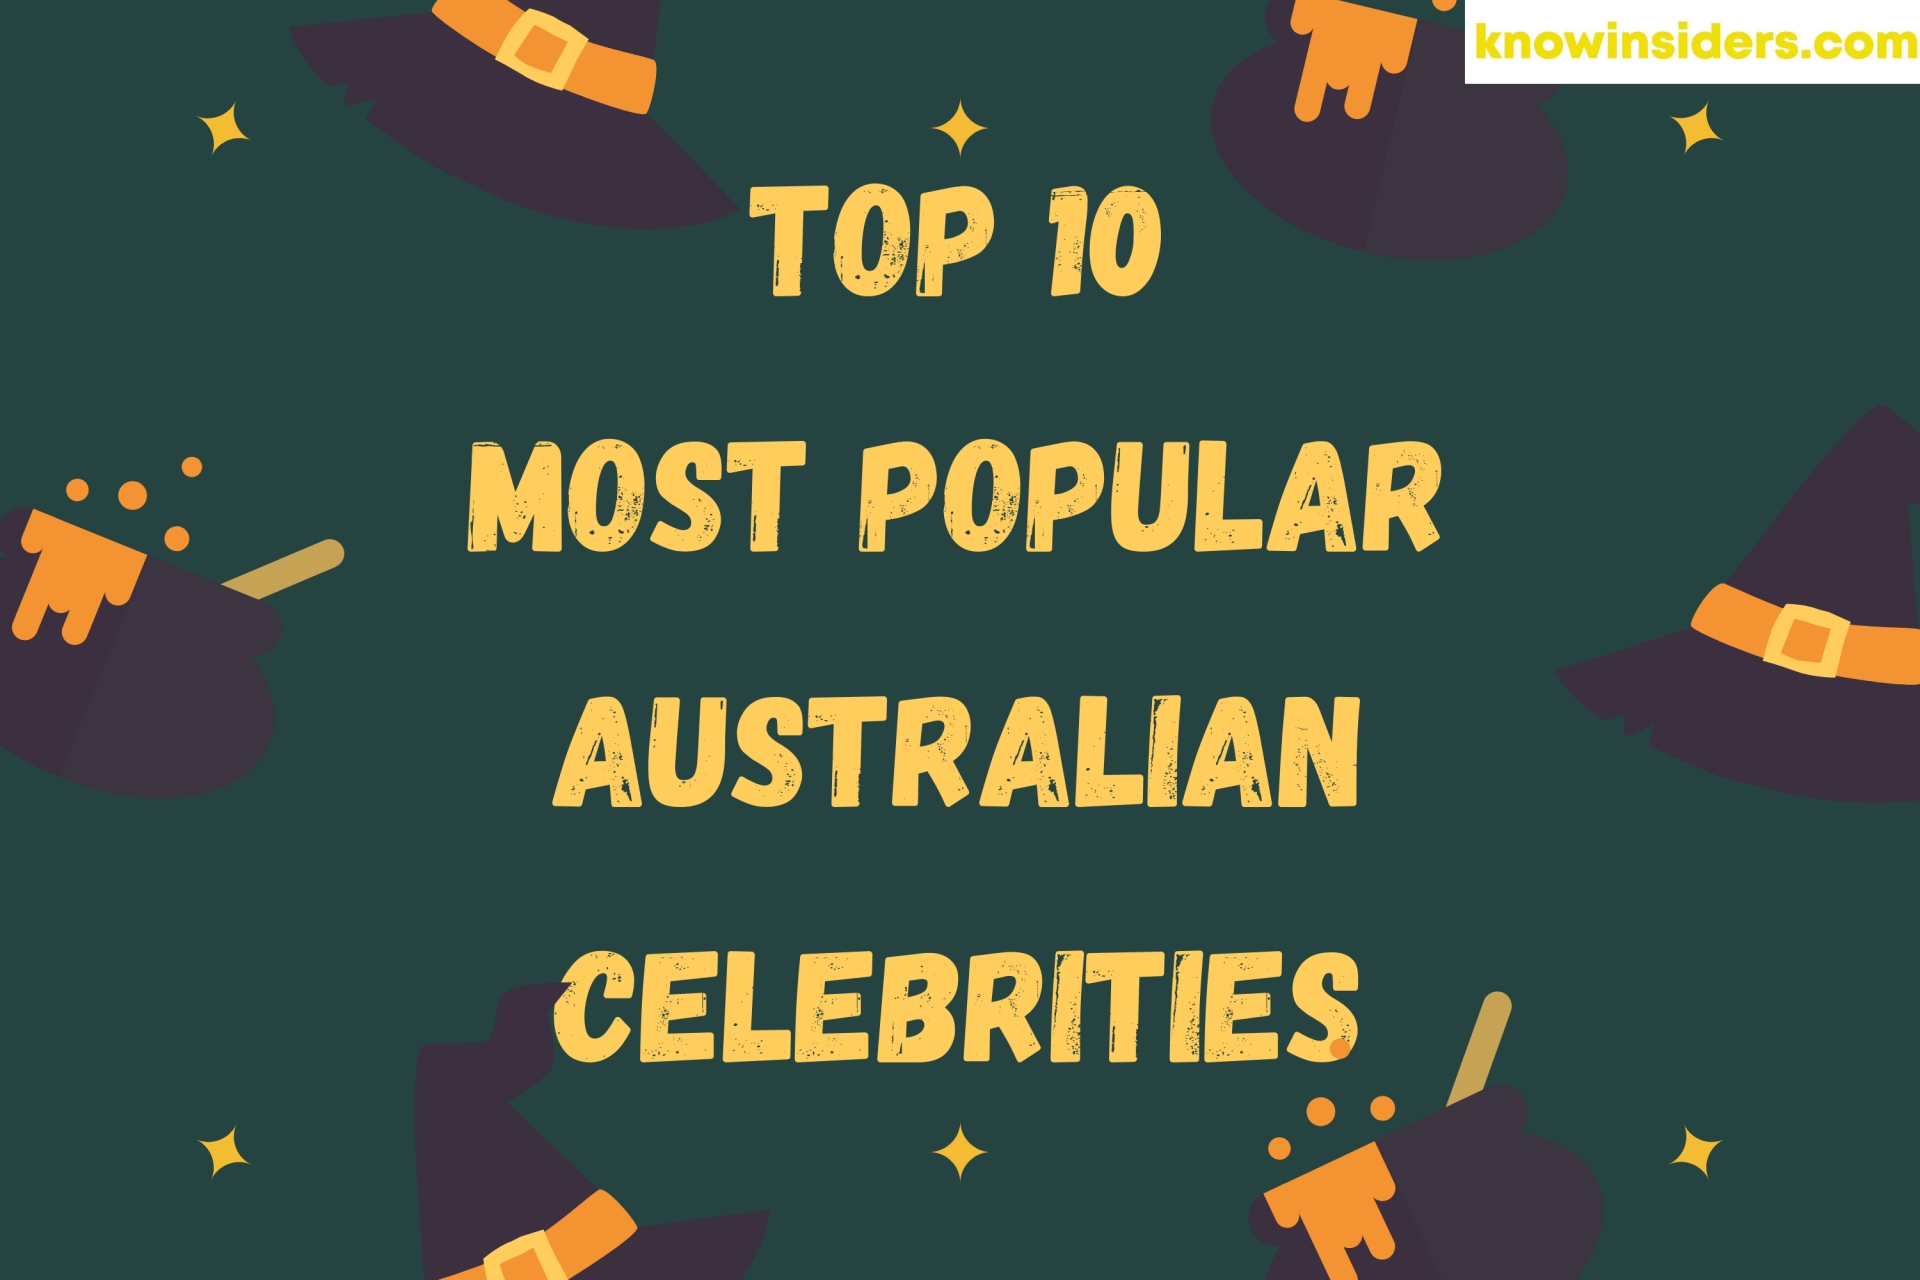 Who Are The Most Popular Australian Celebrities - Top 10